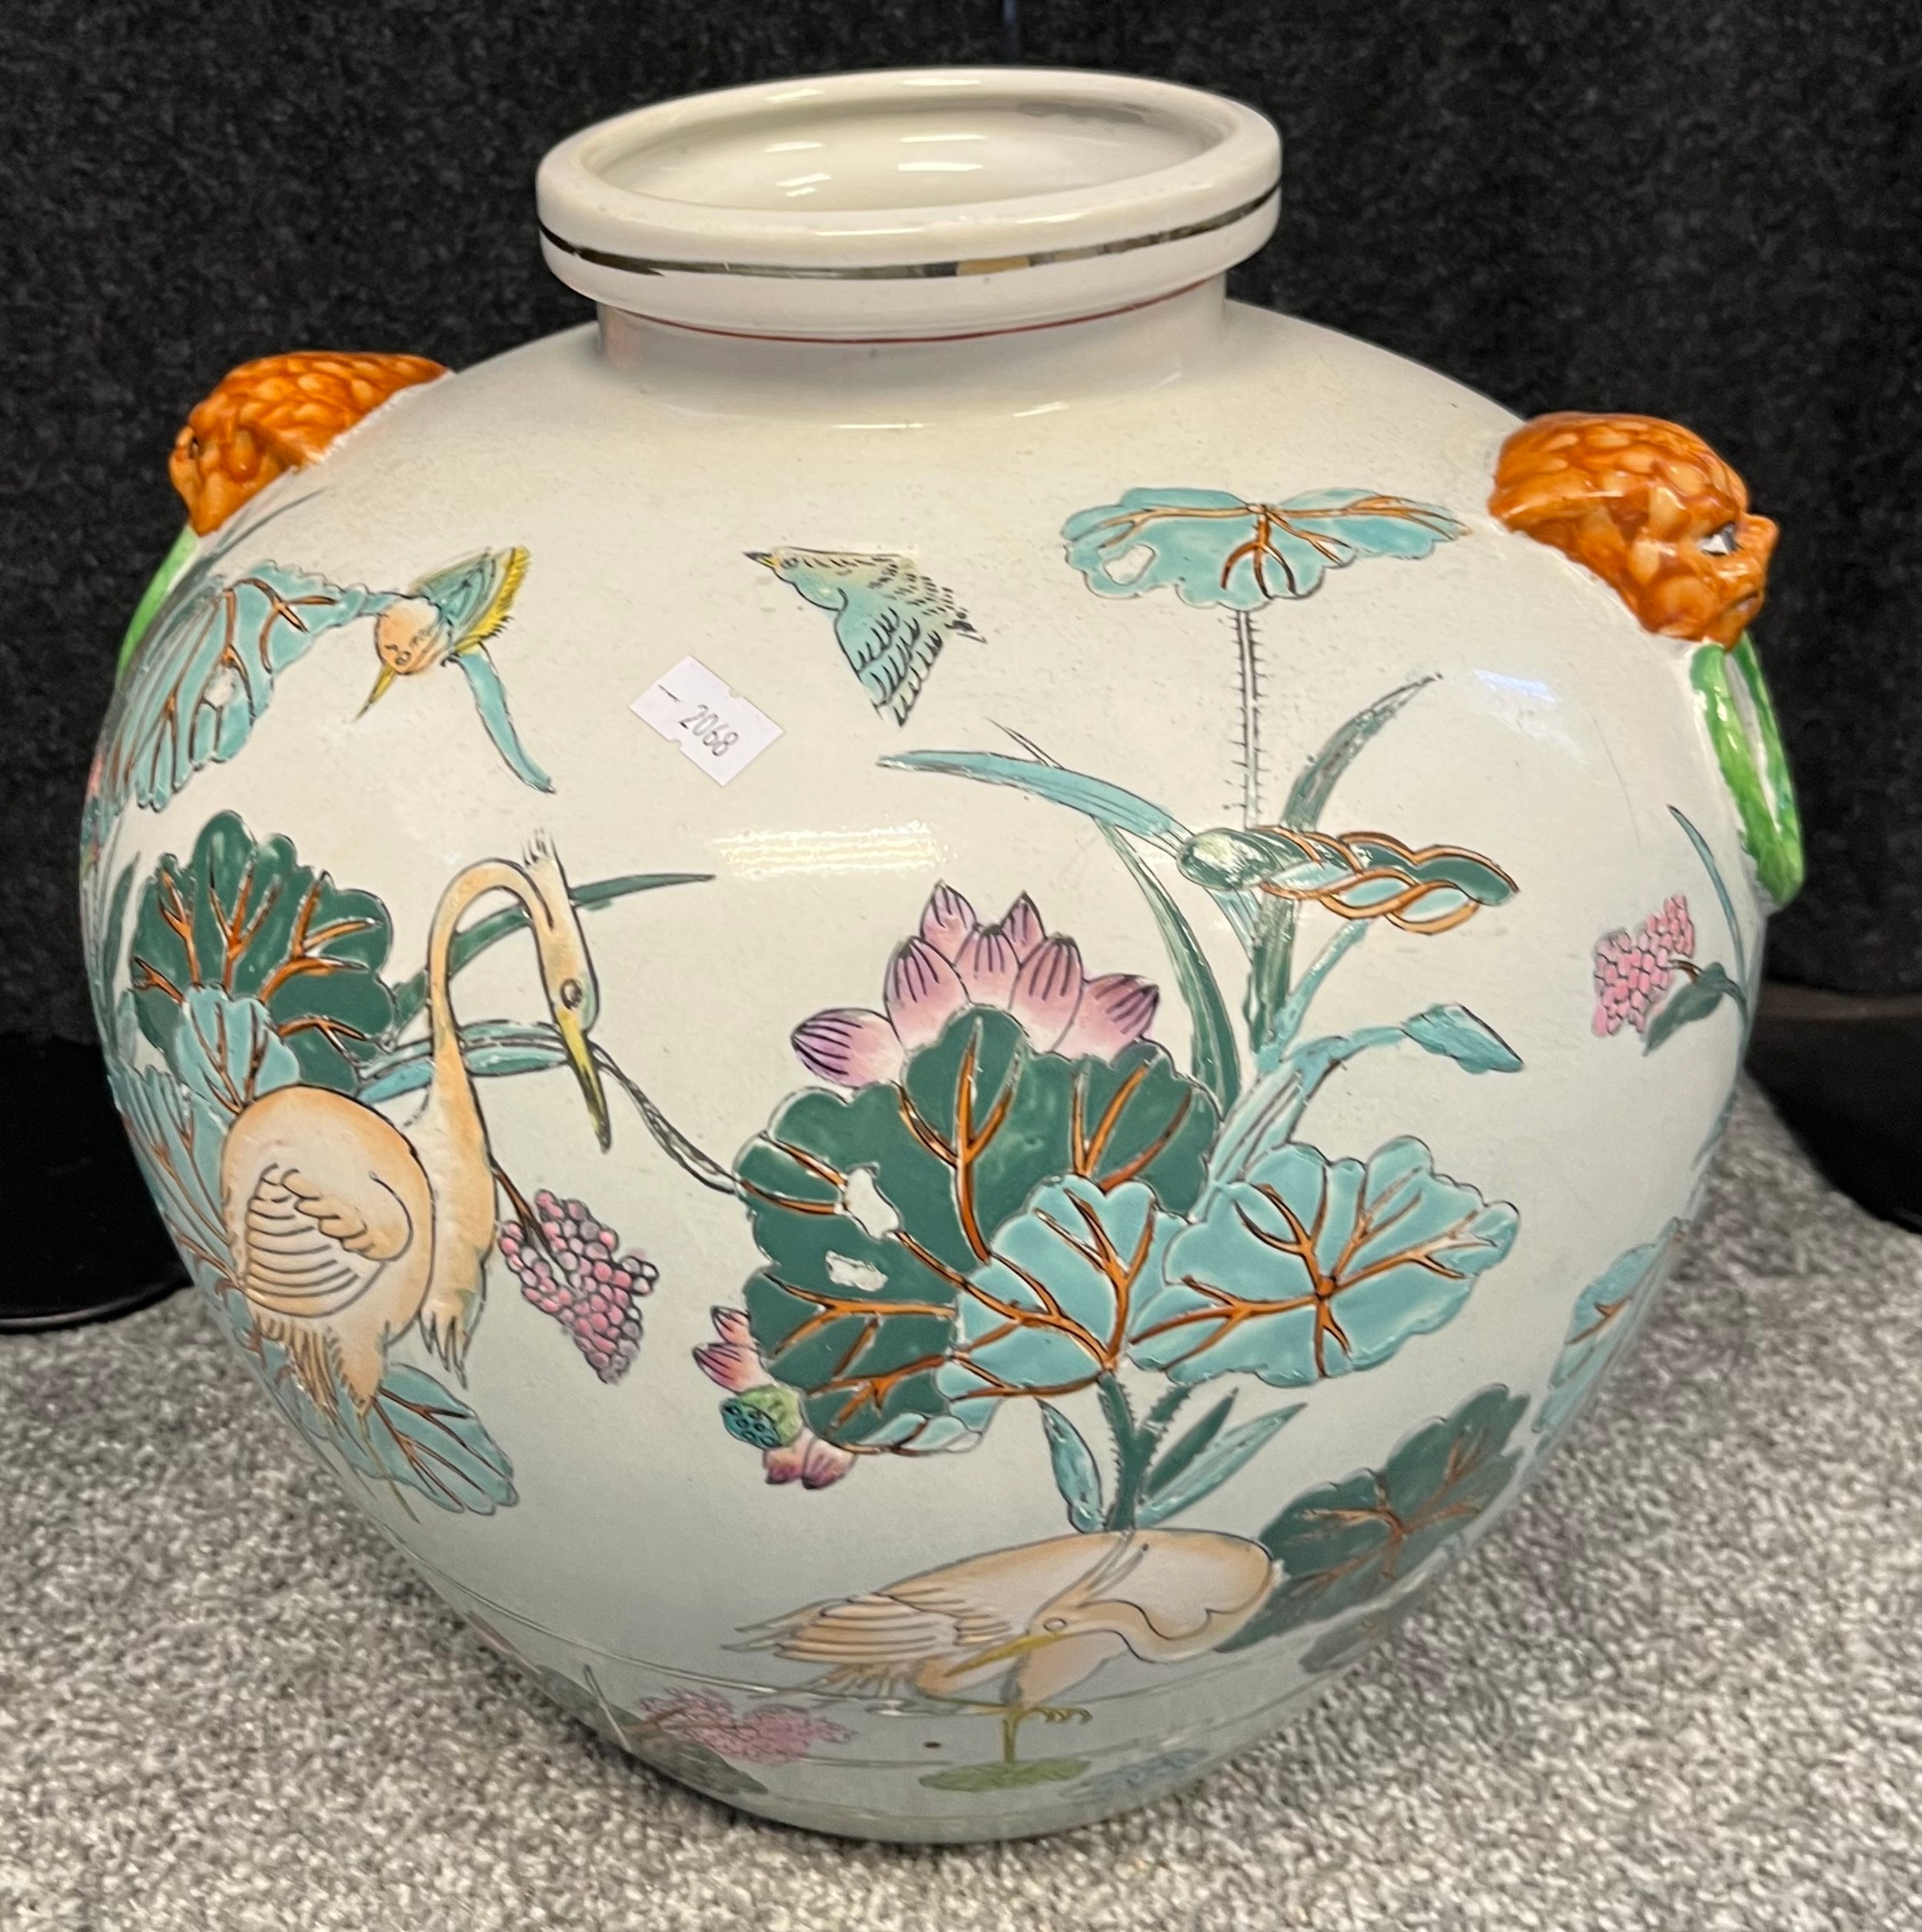 20th century Chinese bulbous vase depicting floral and bird design. [28cm high] - Image 4 of 4